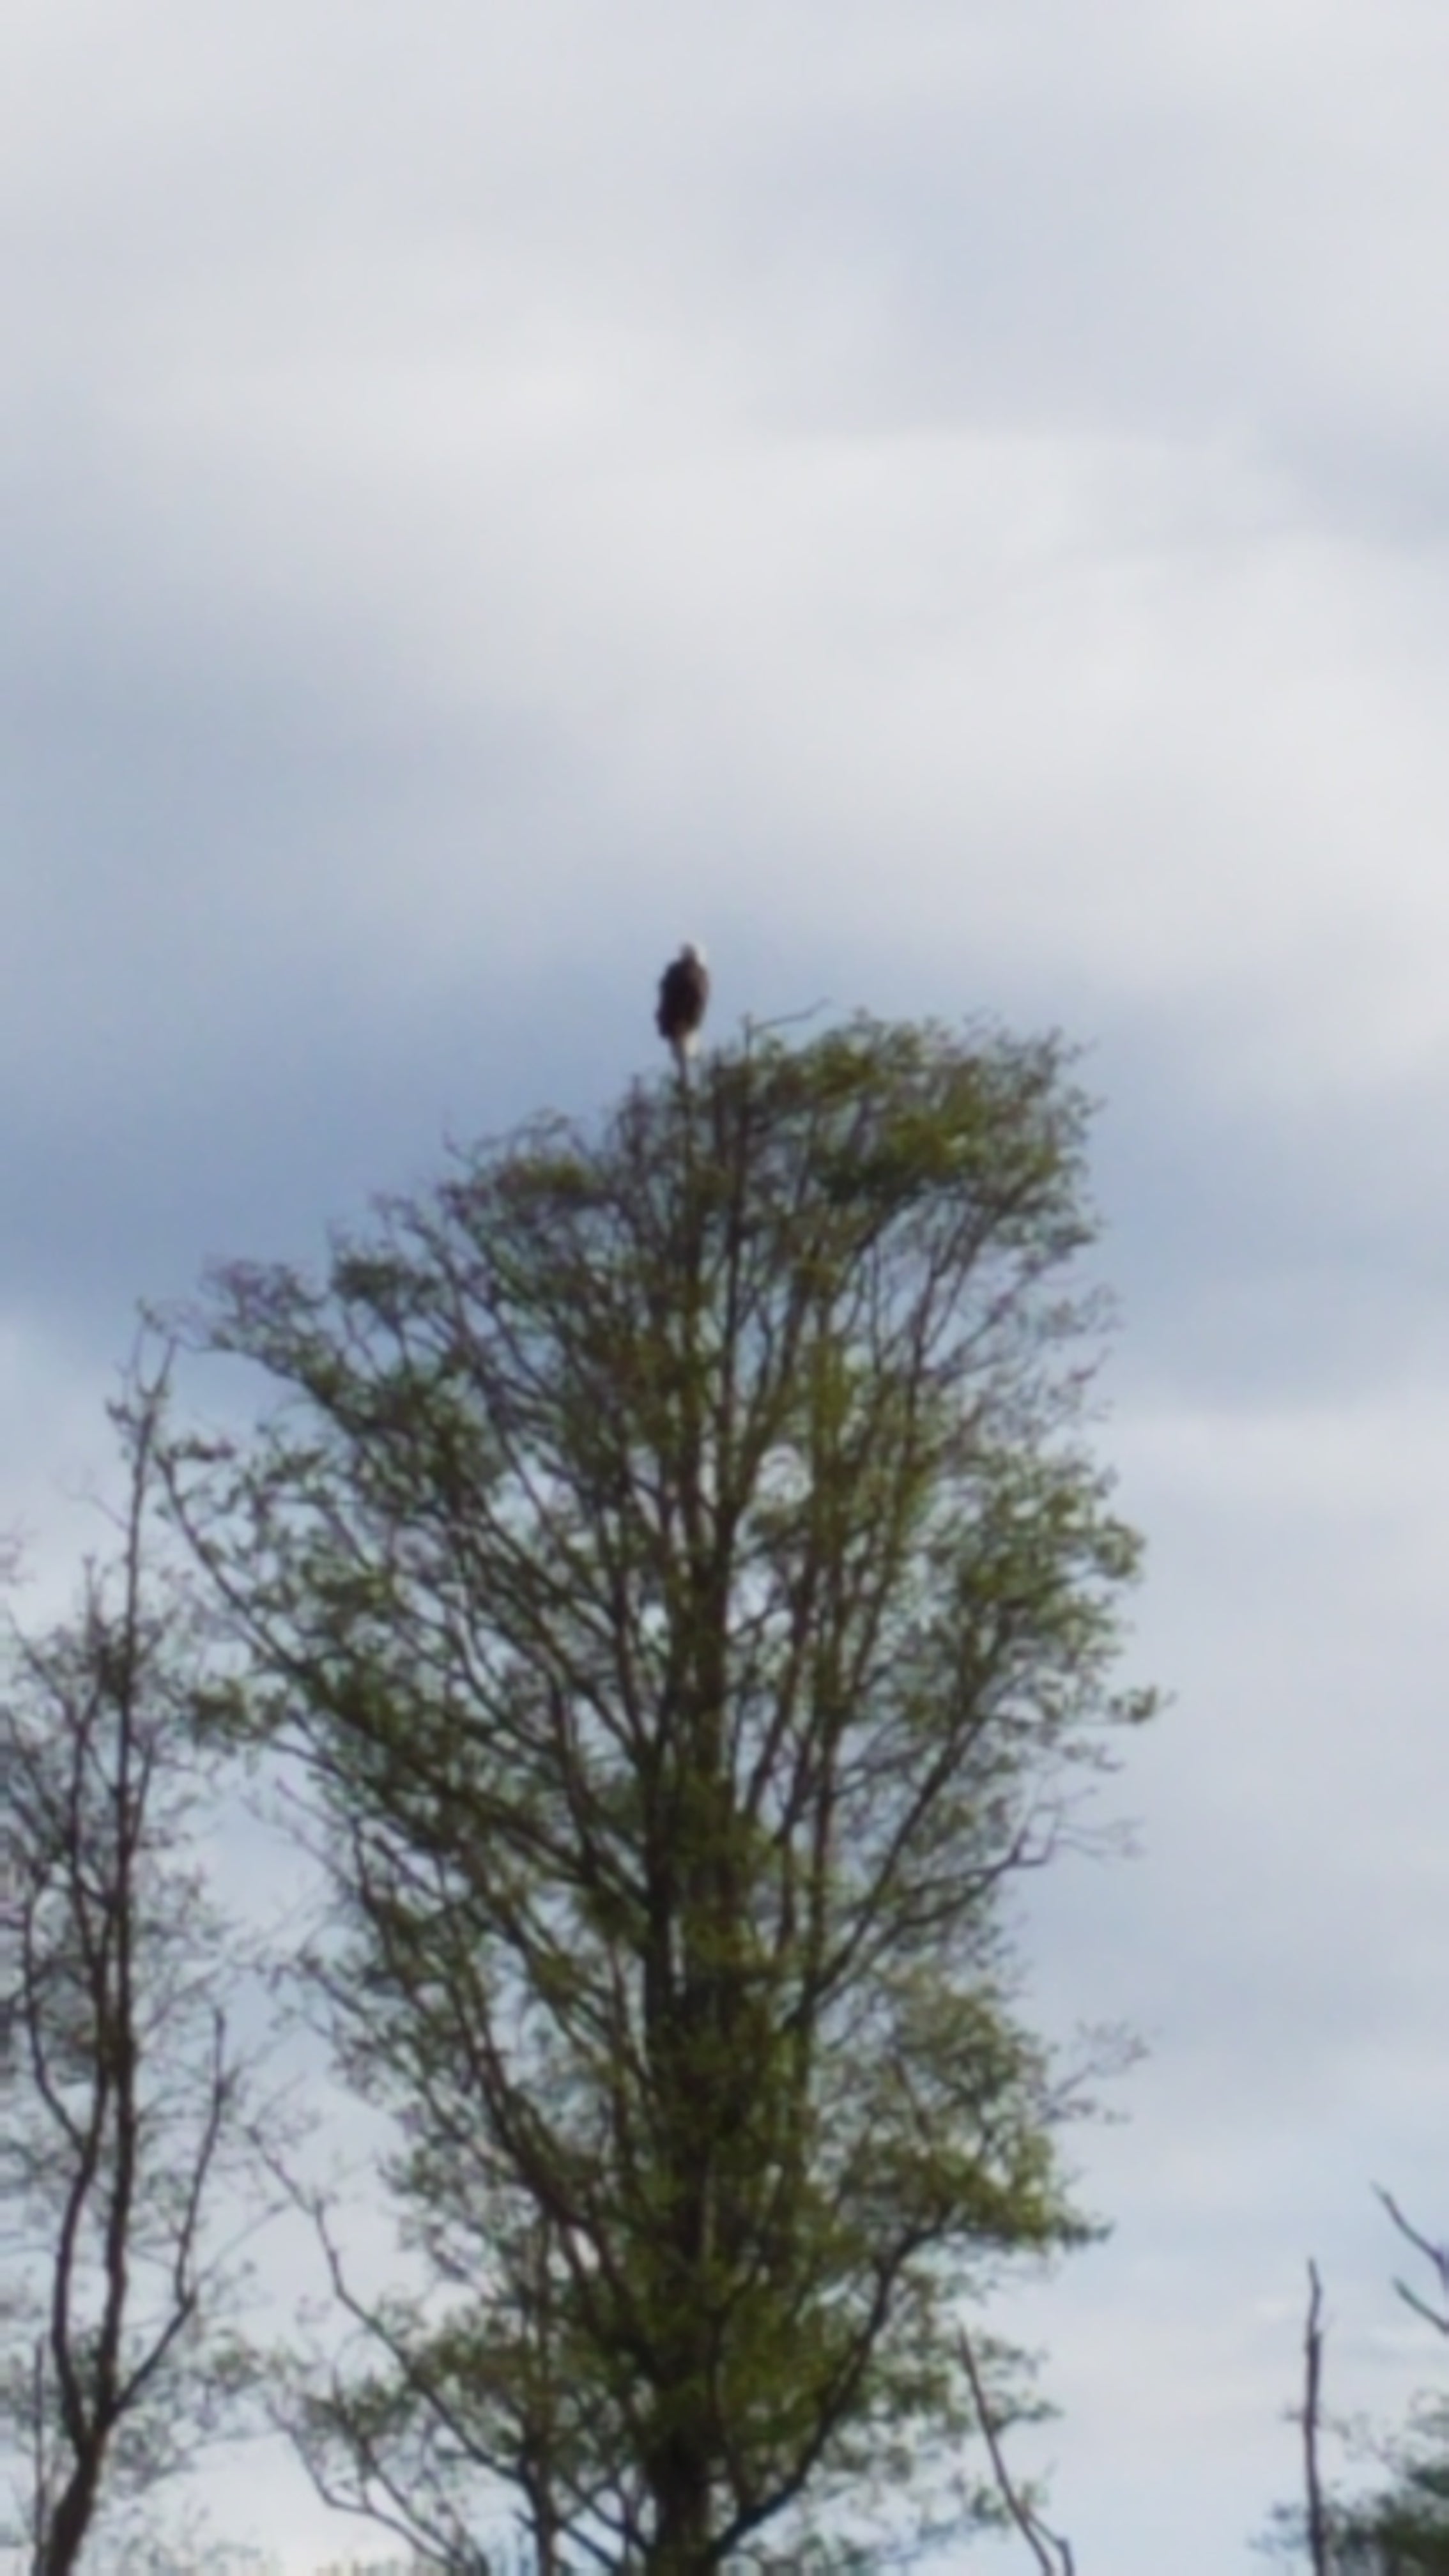 Bald eagle on top of tree